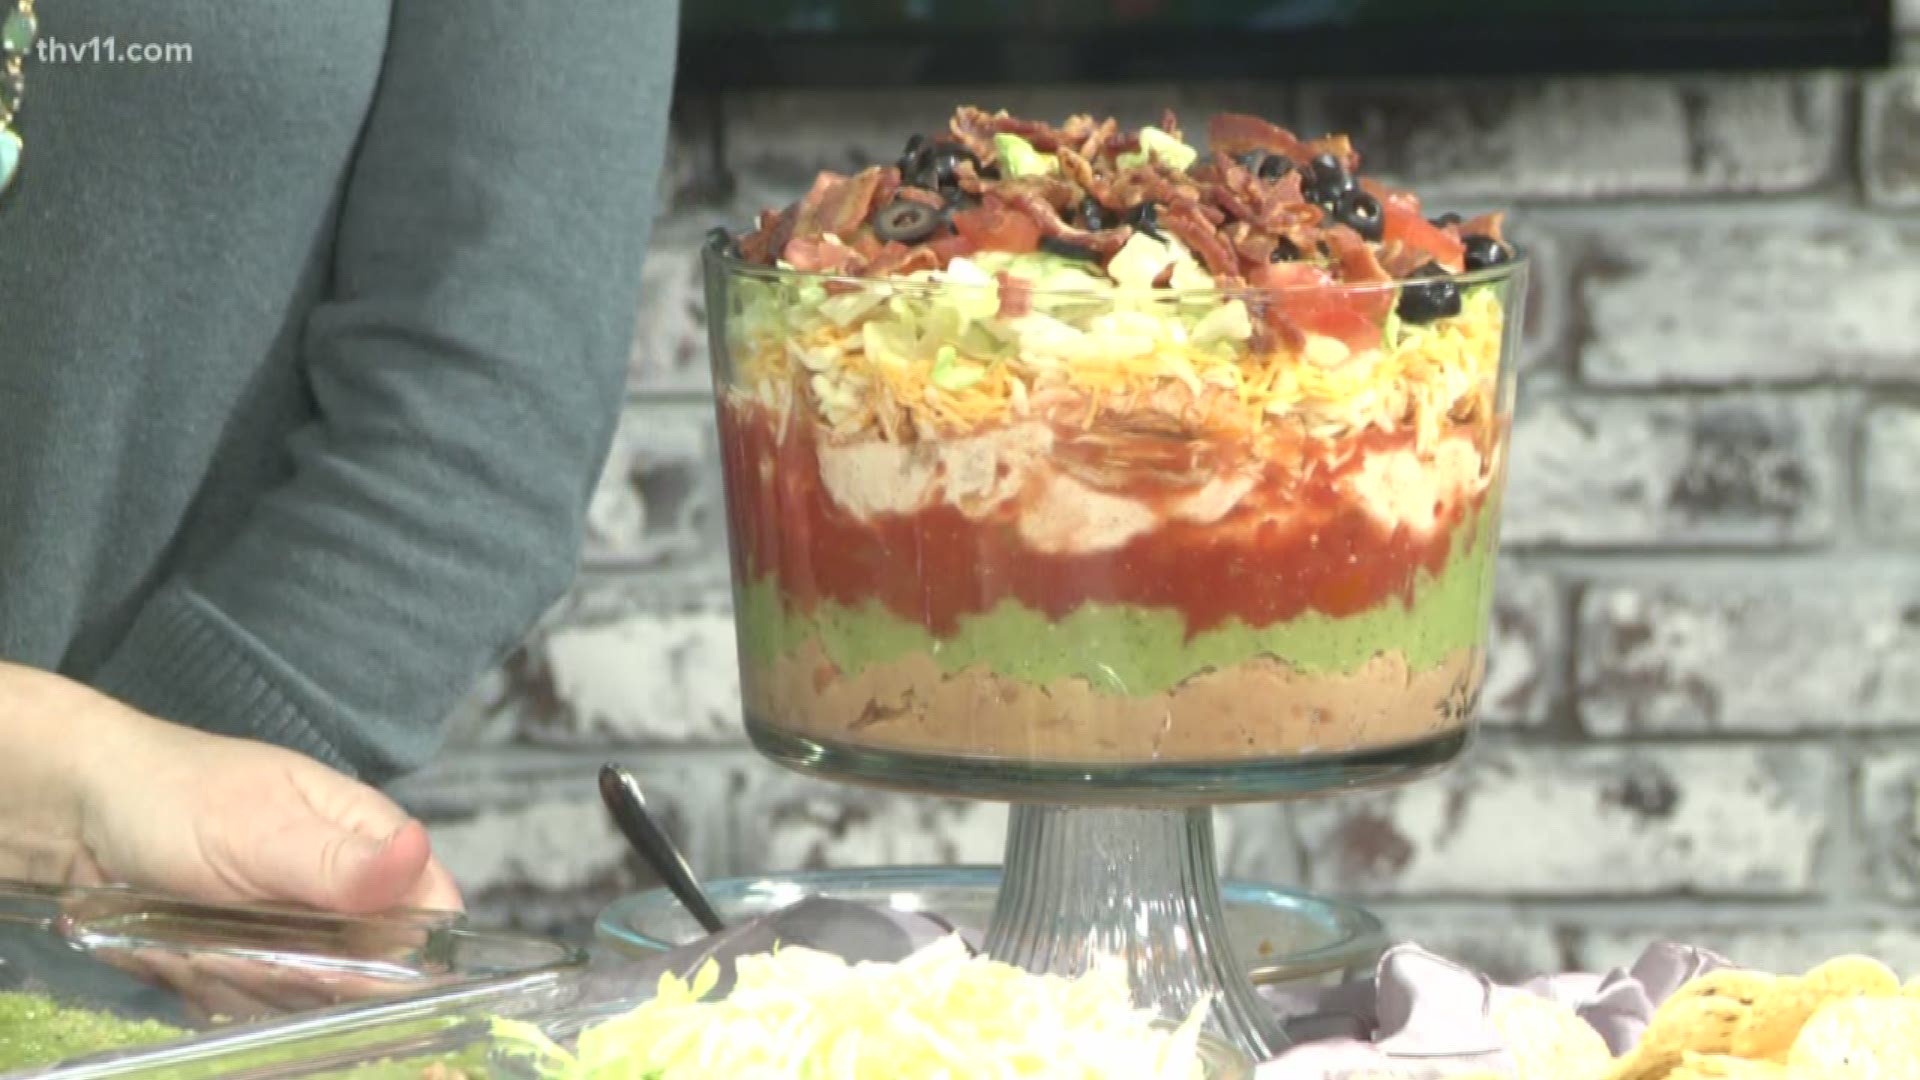 This seven-layer dip is a hassle-free way to feed your Super Bowl-watching crowd.